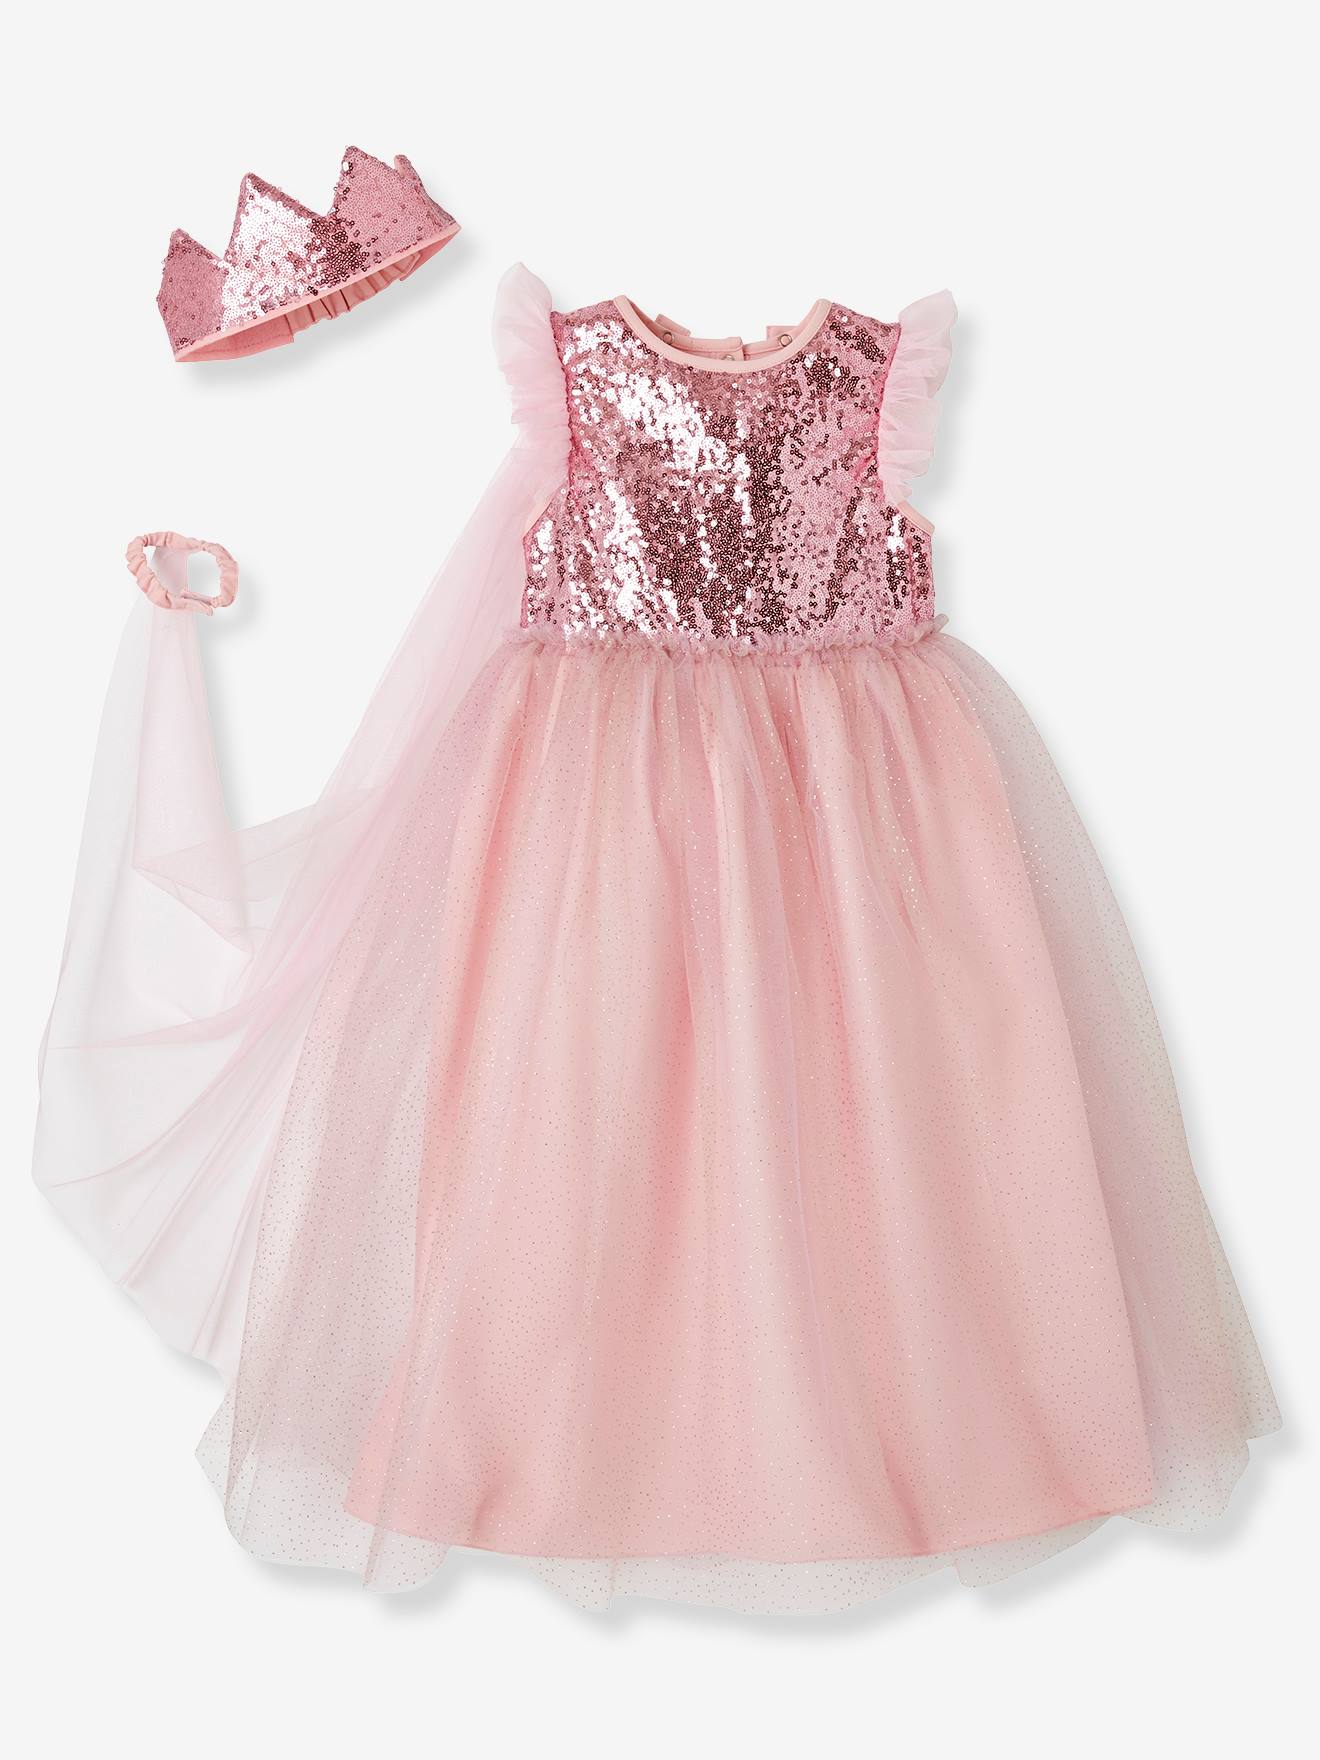 Princess dress and pink necklace froufrou and veil disguise